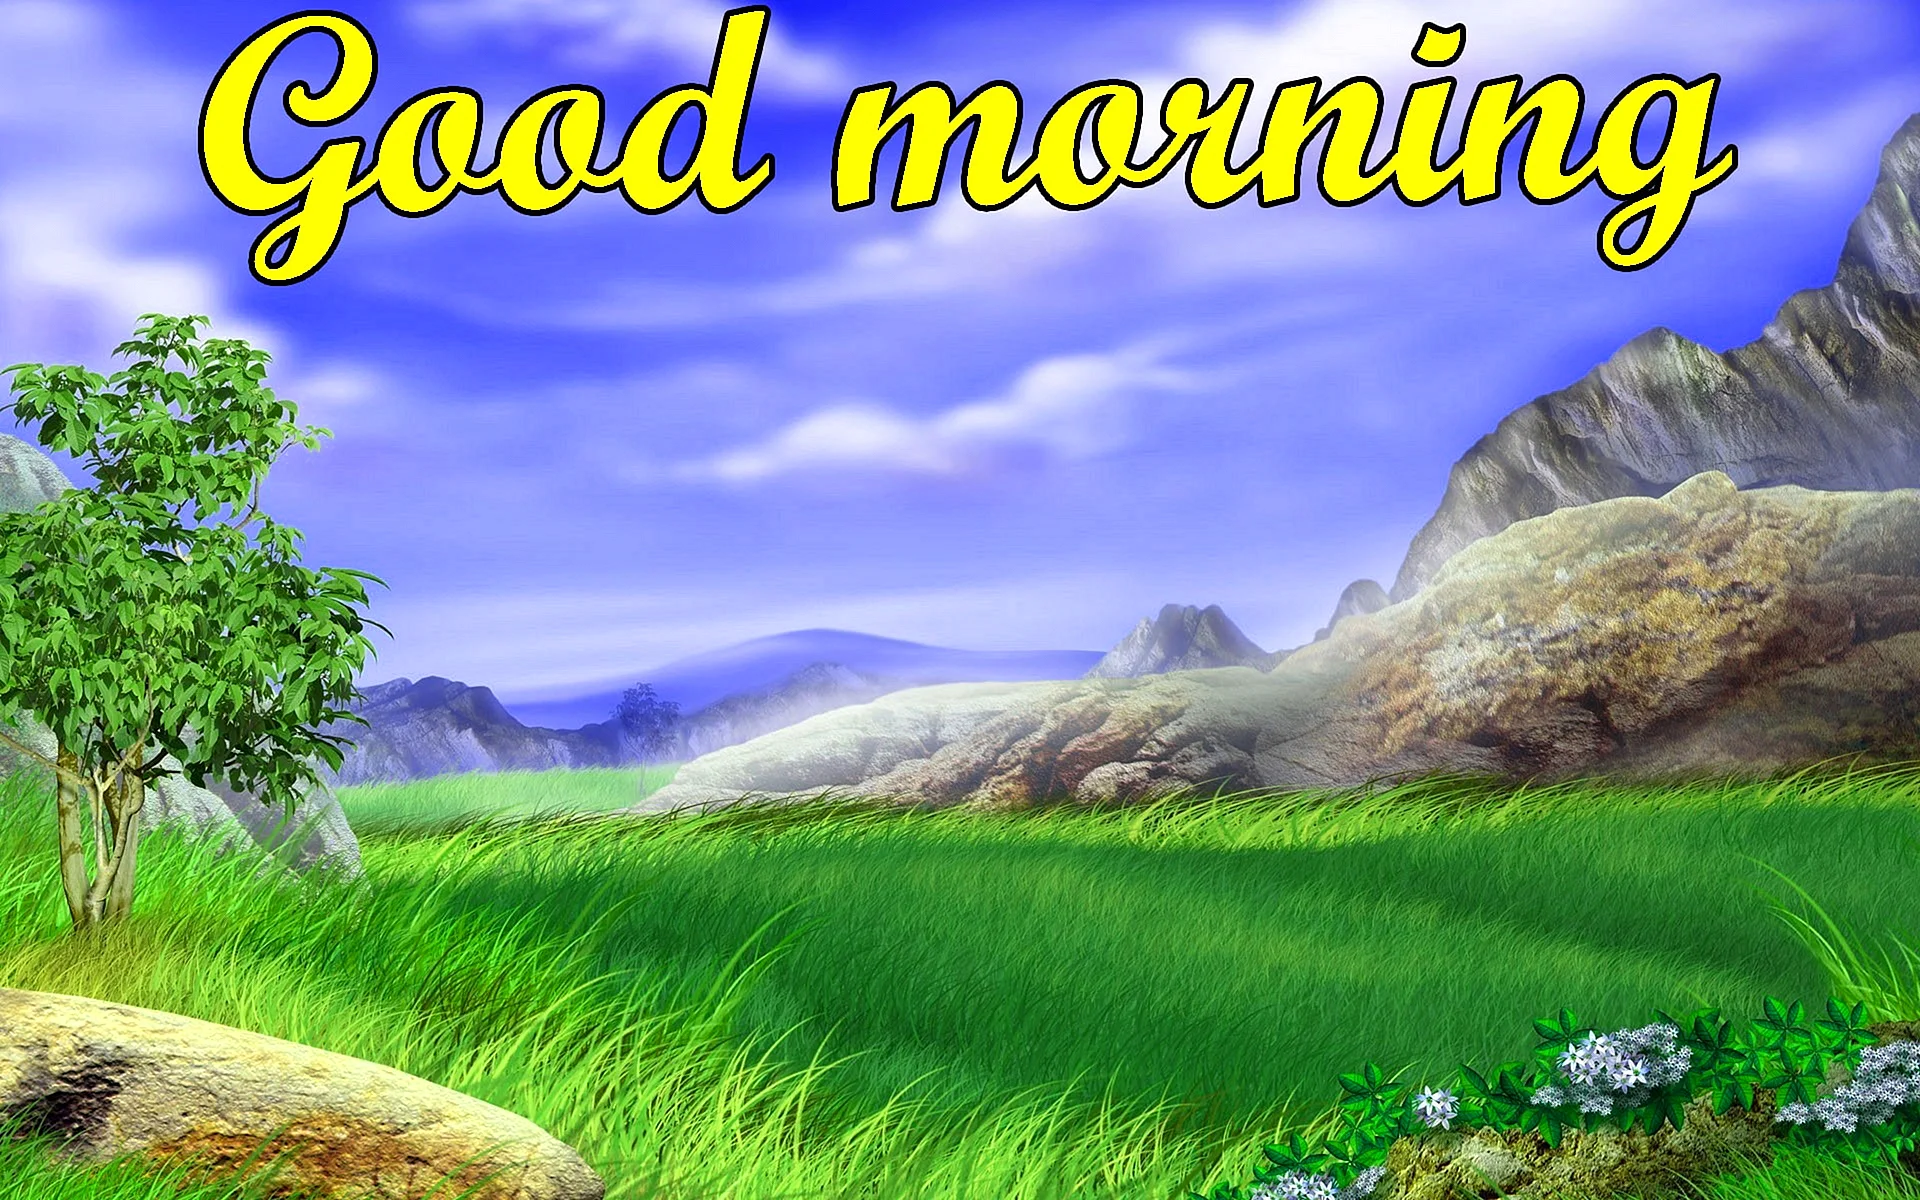 Good Morning Wishes With Beautiful Scenery Wallpapers - Free Good ...